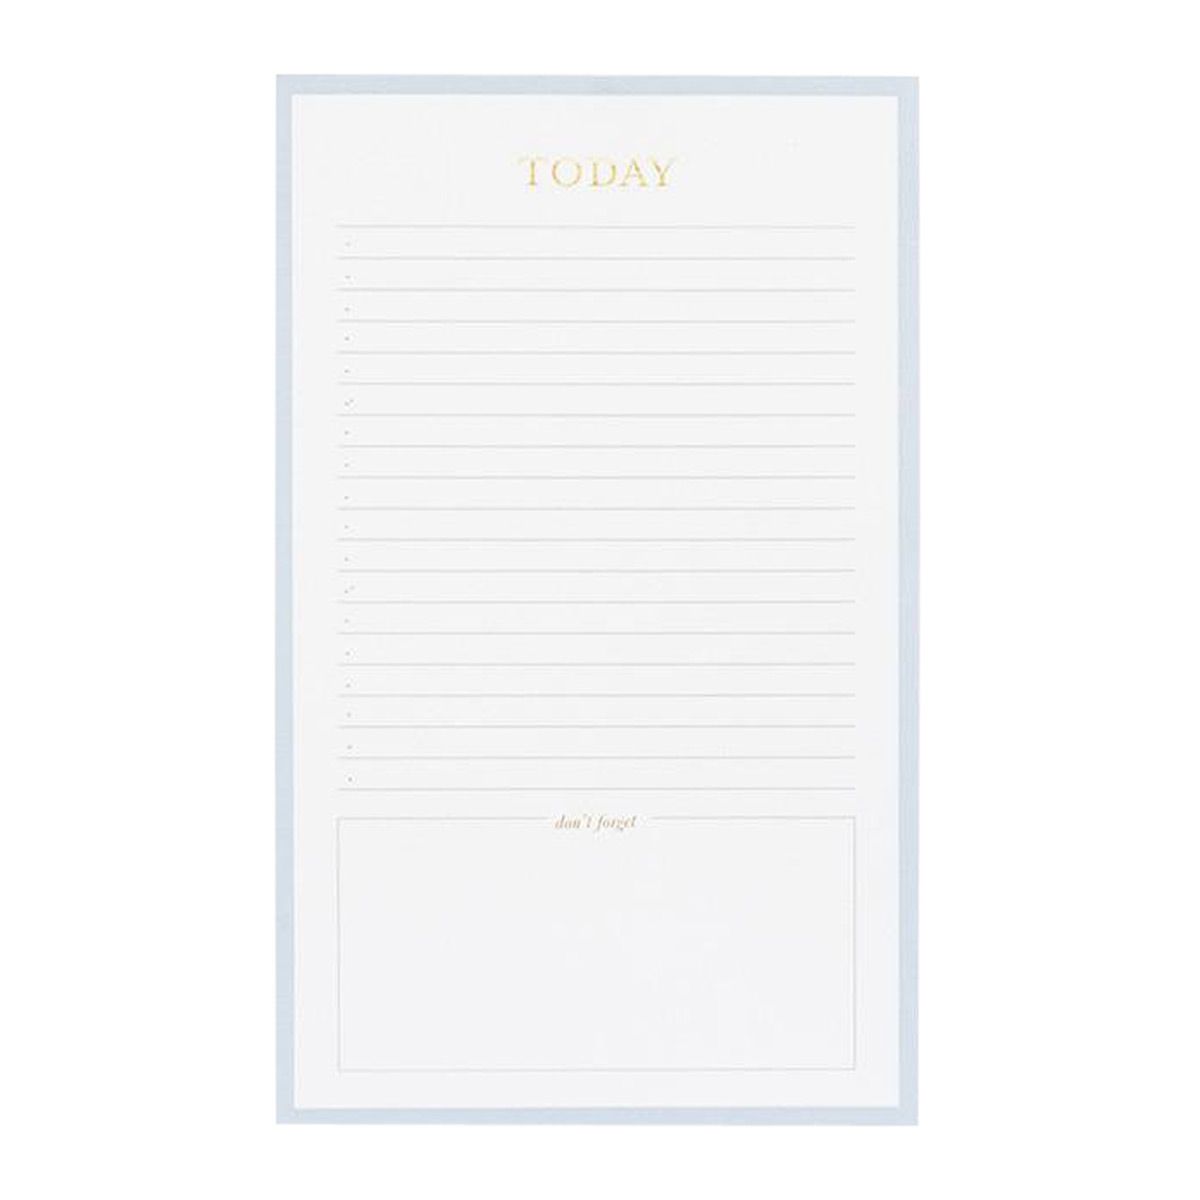 Today Lined Checklist Notepad | The Container Store